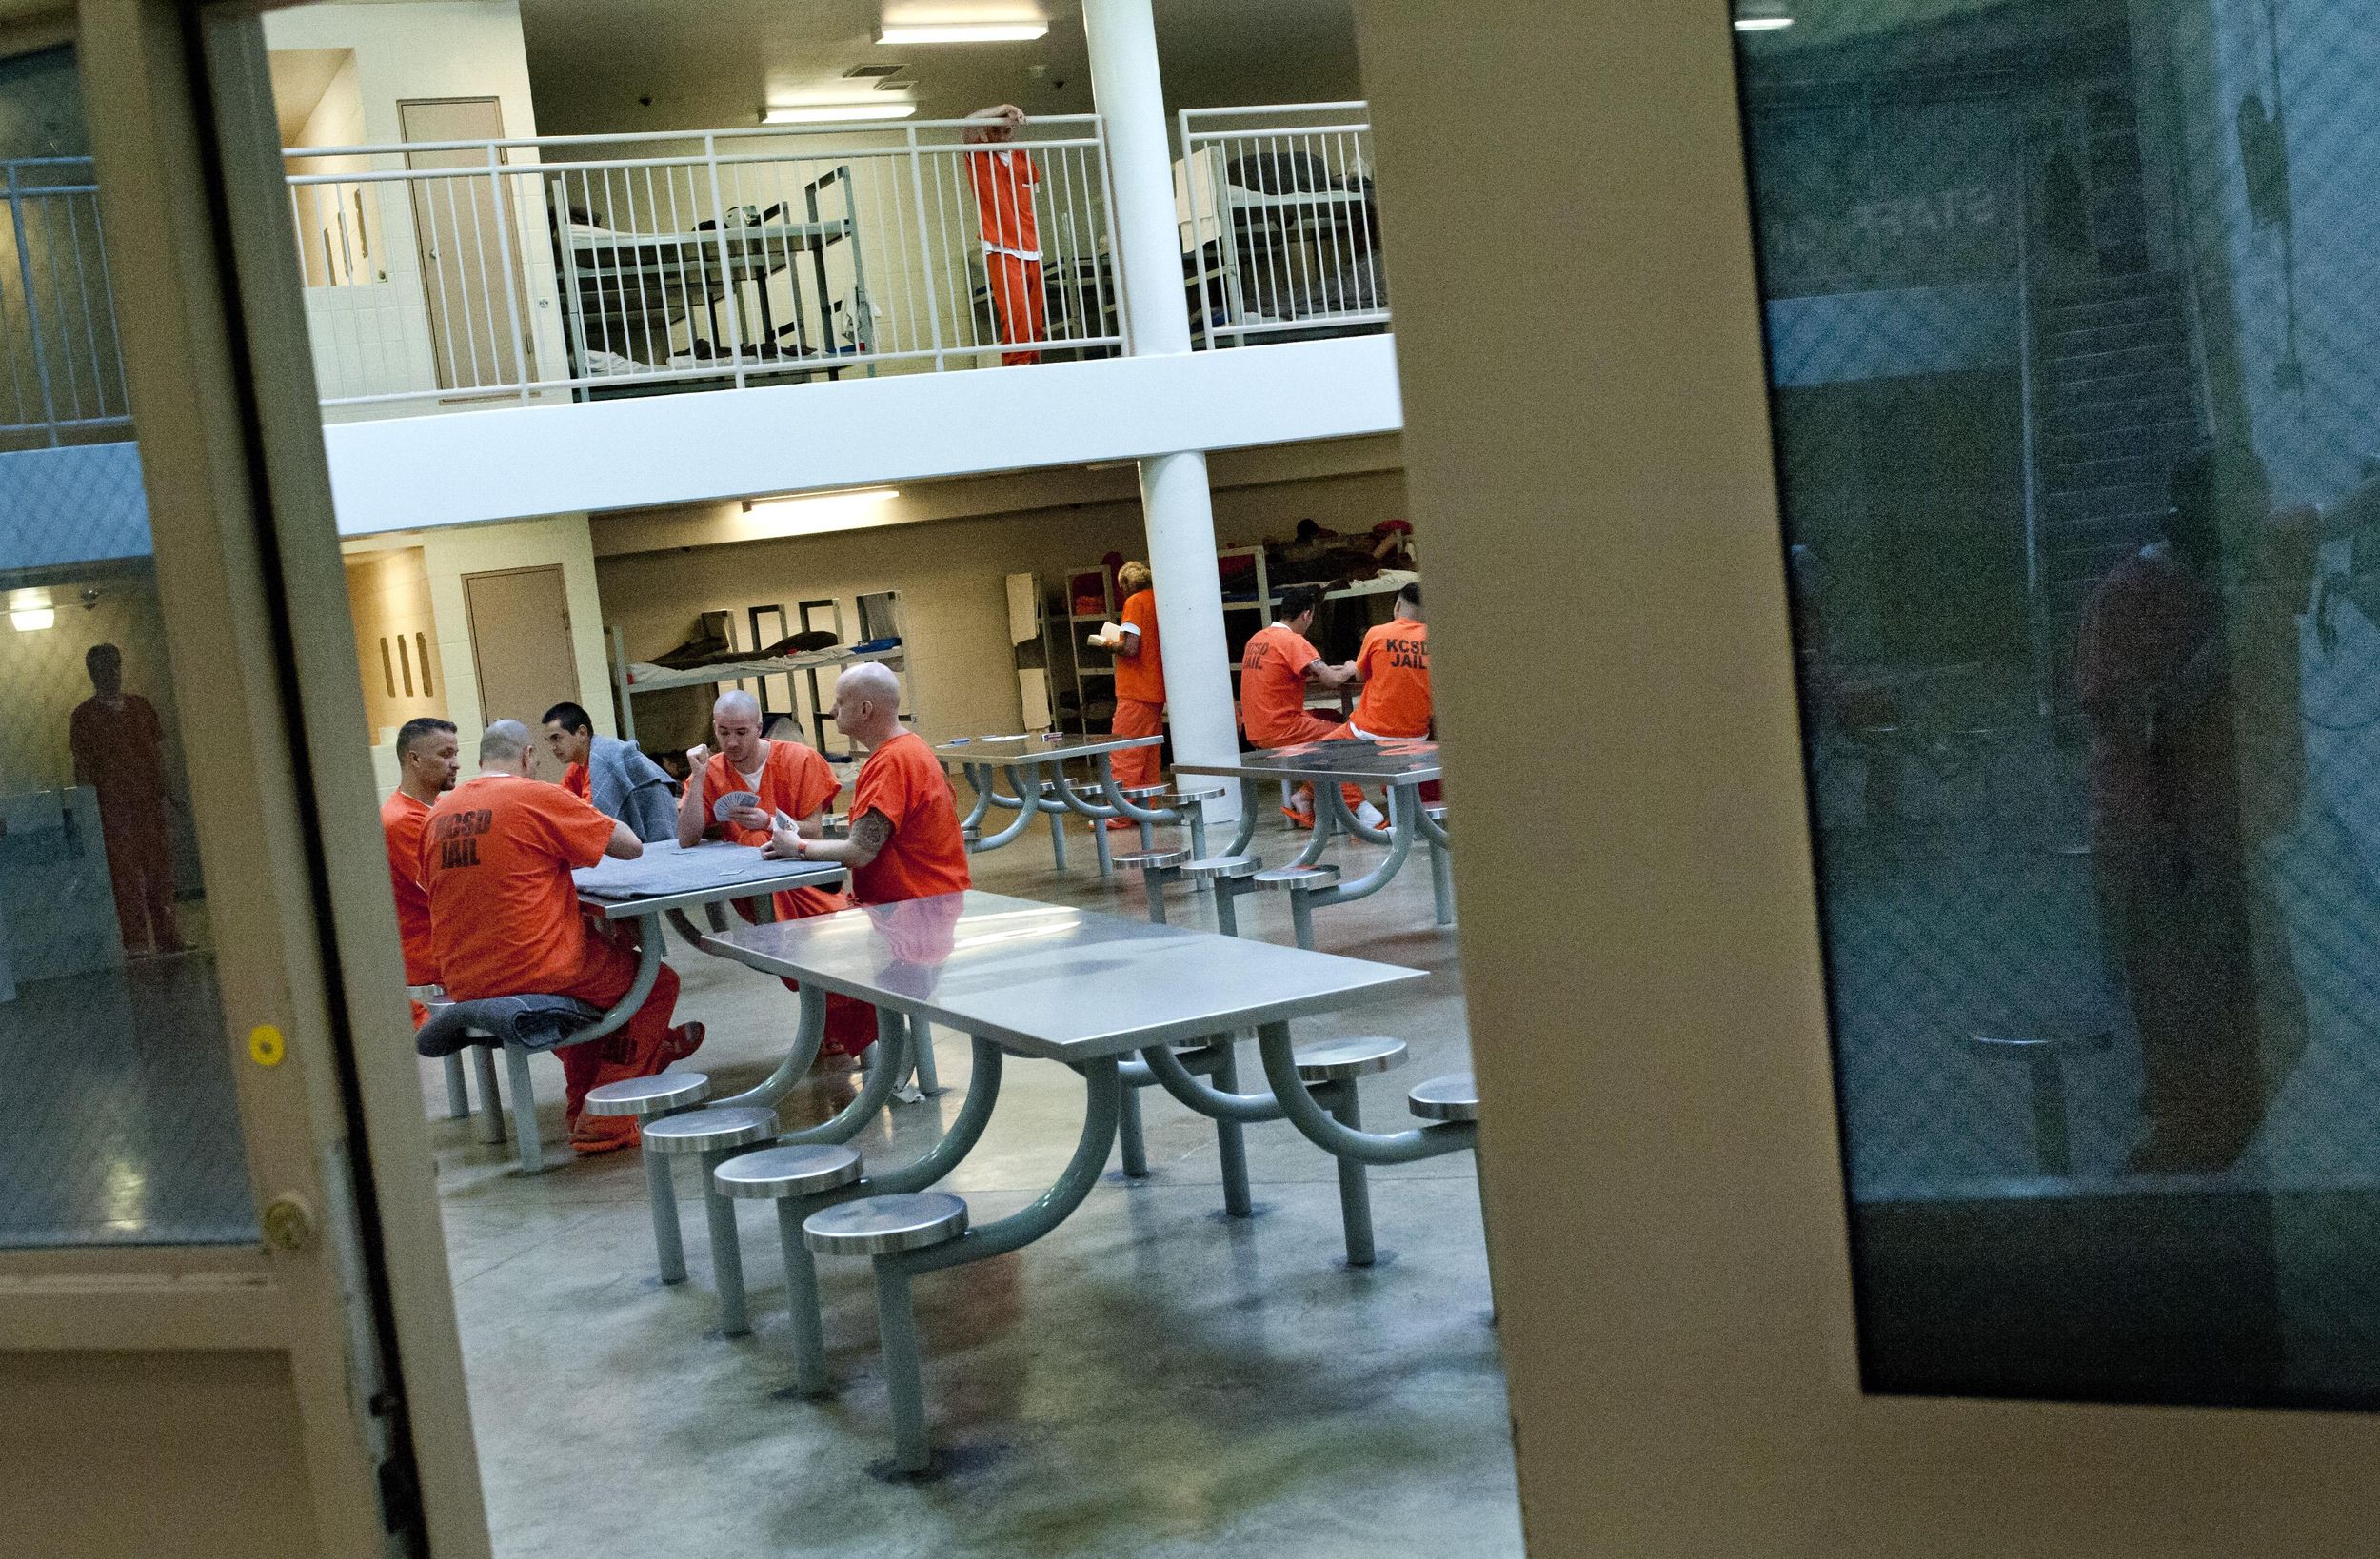 Kootenai County prepares for jail expansion as inmate population spikes